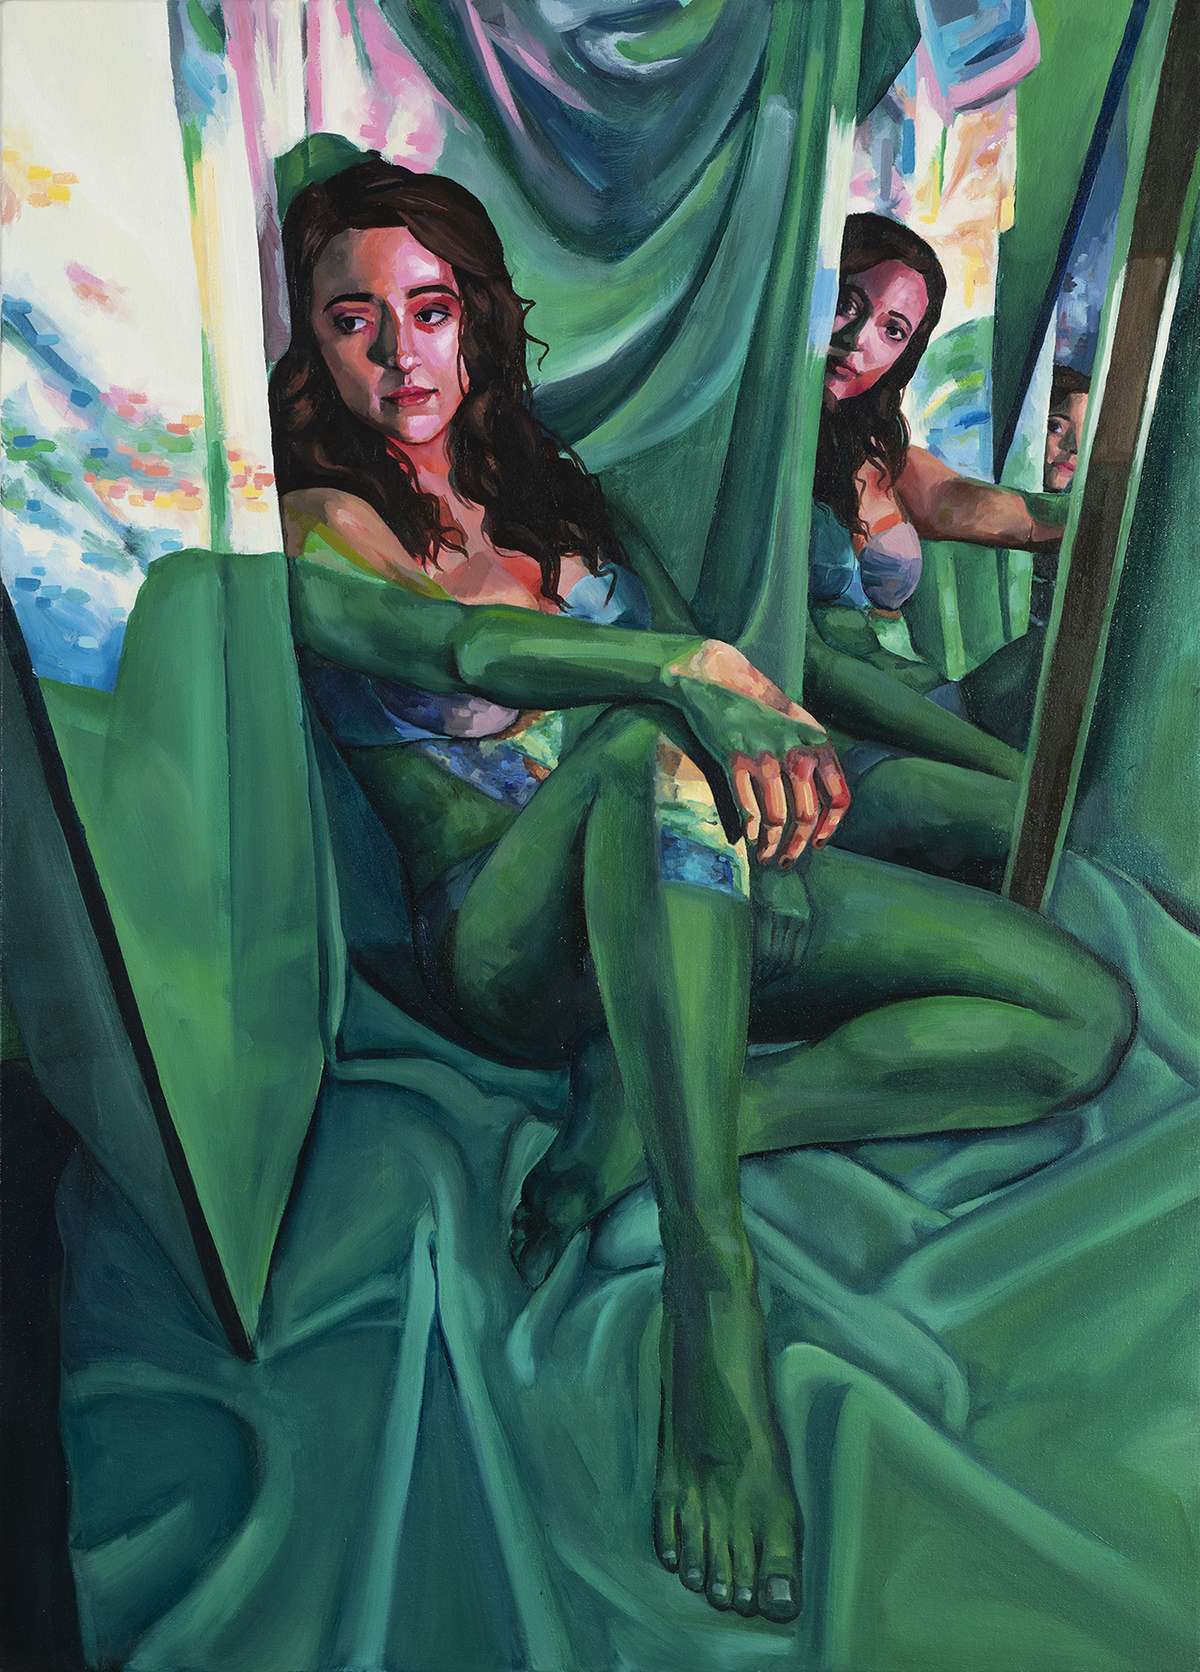 A painting of three women, with tones of greens, yellows and reds.